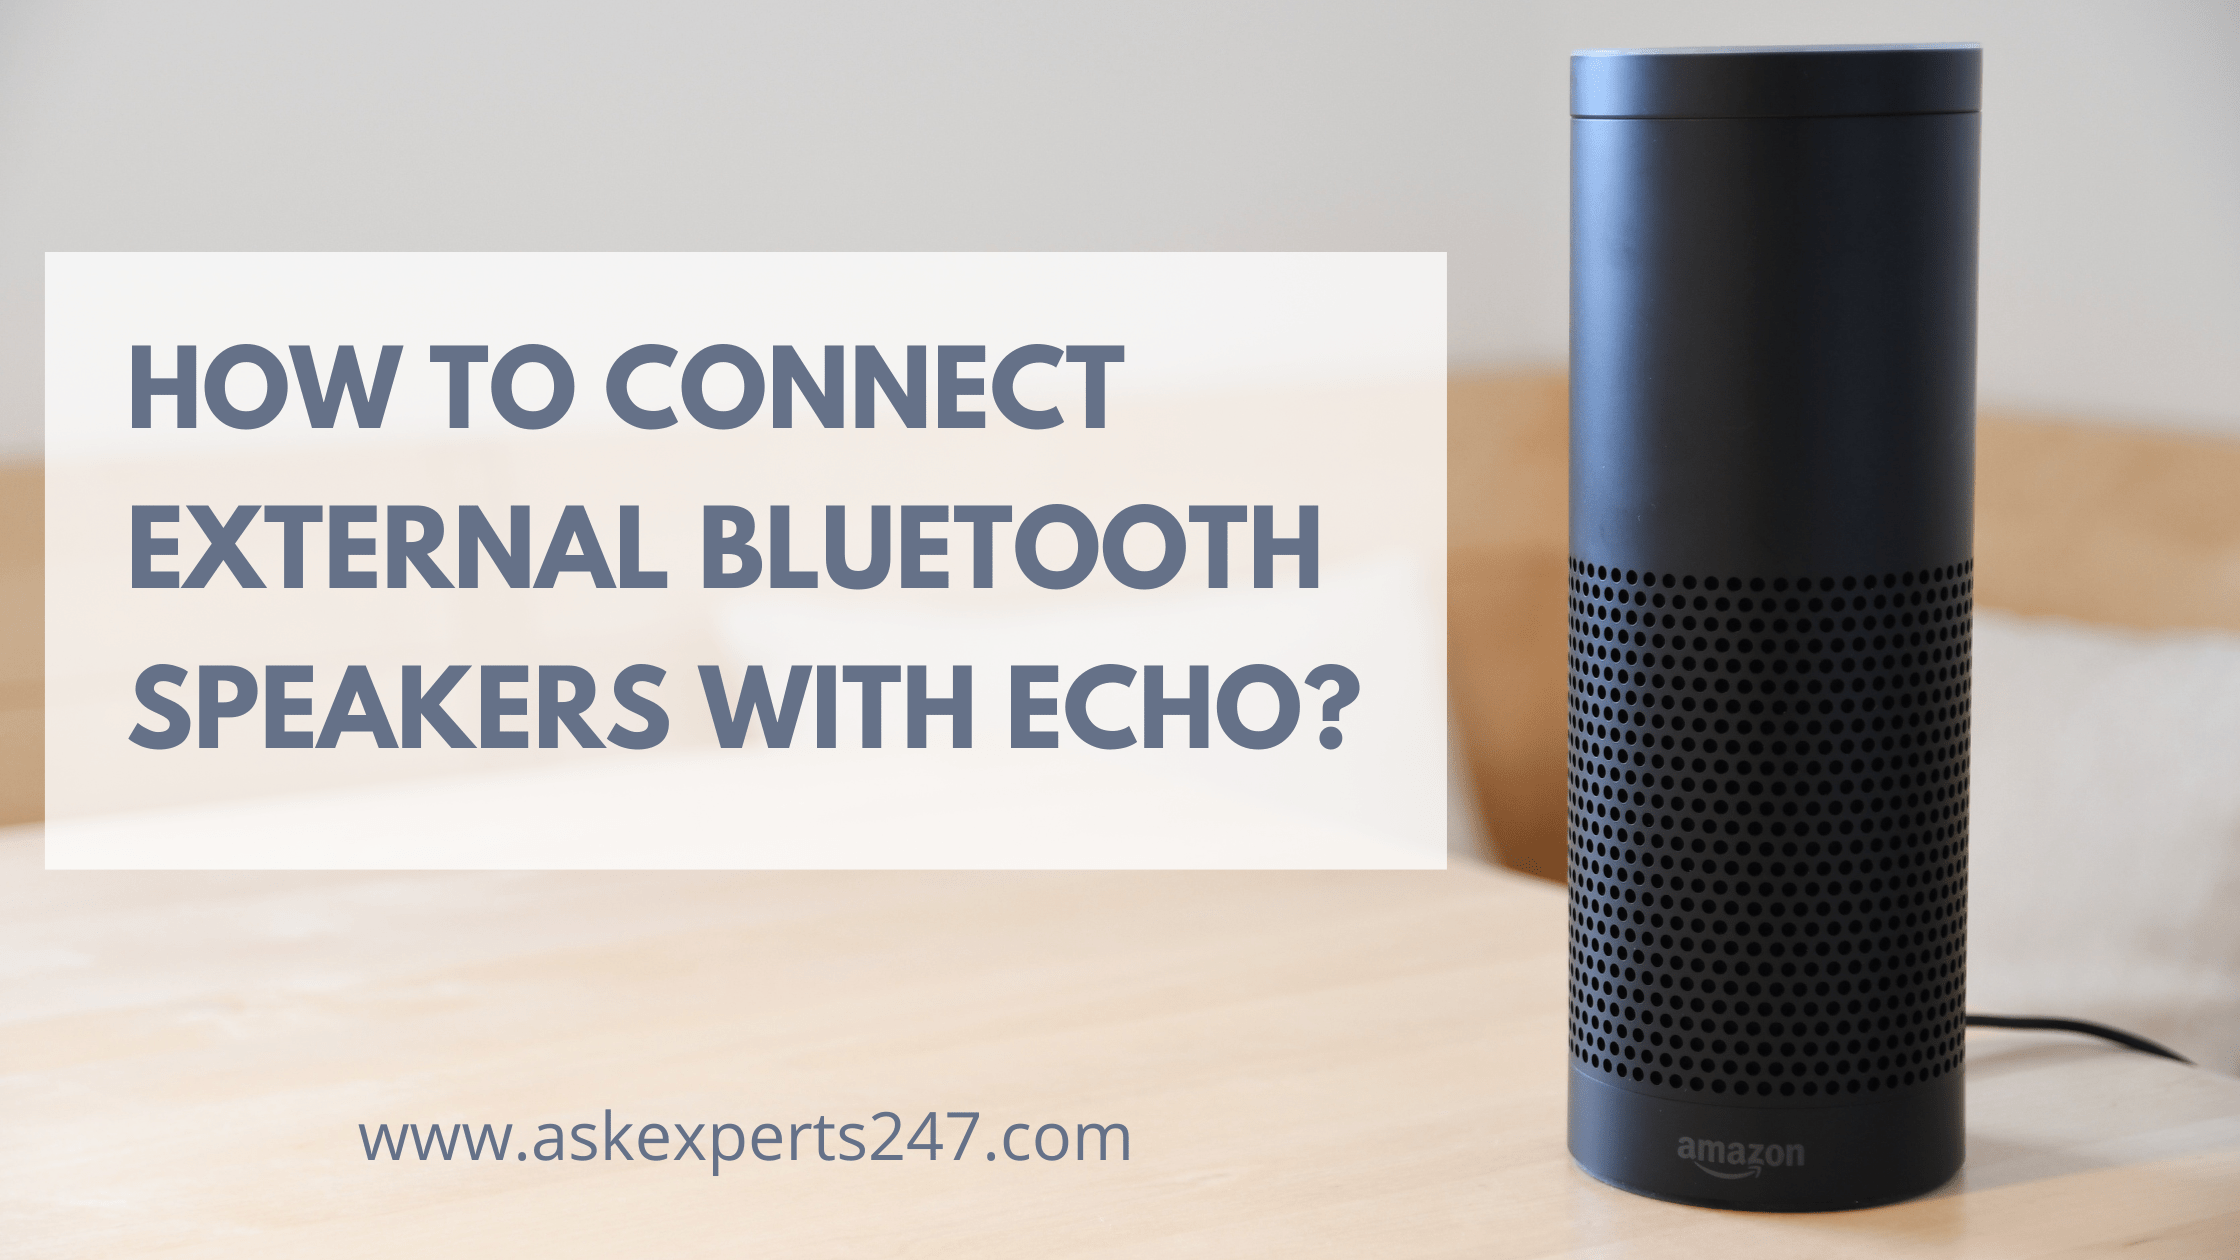 How to Connect External Bluetooth Speakers with Echo?